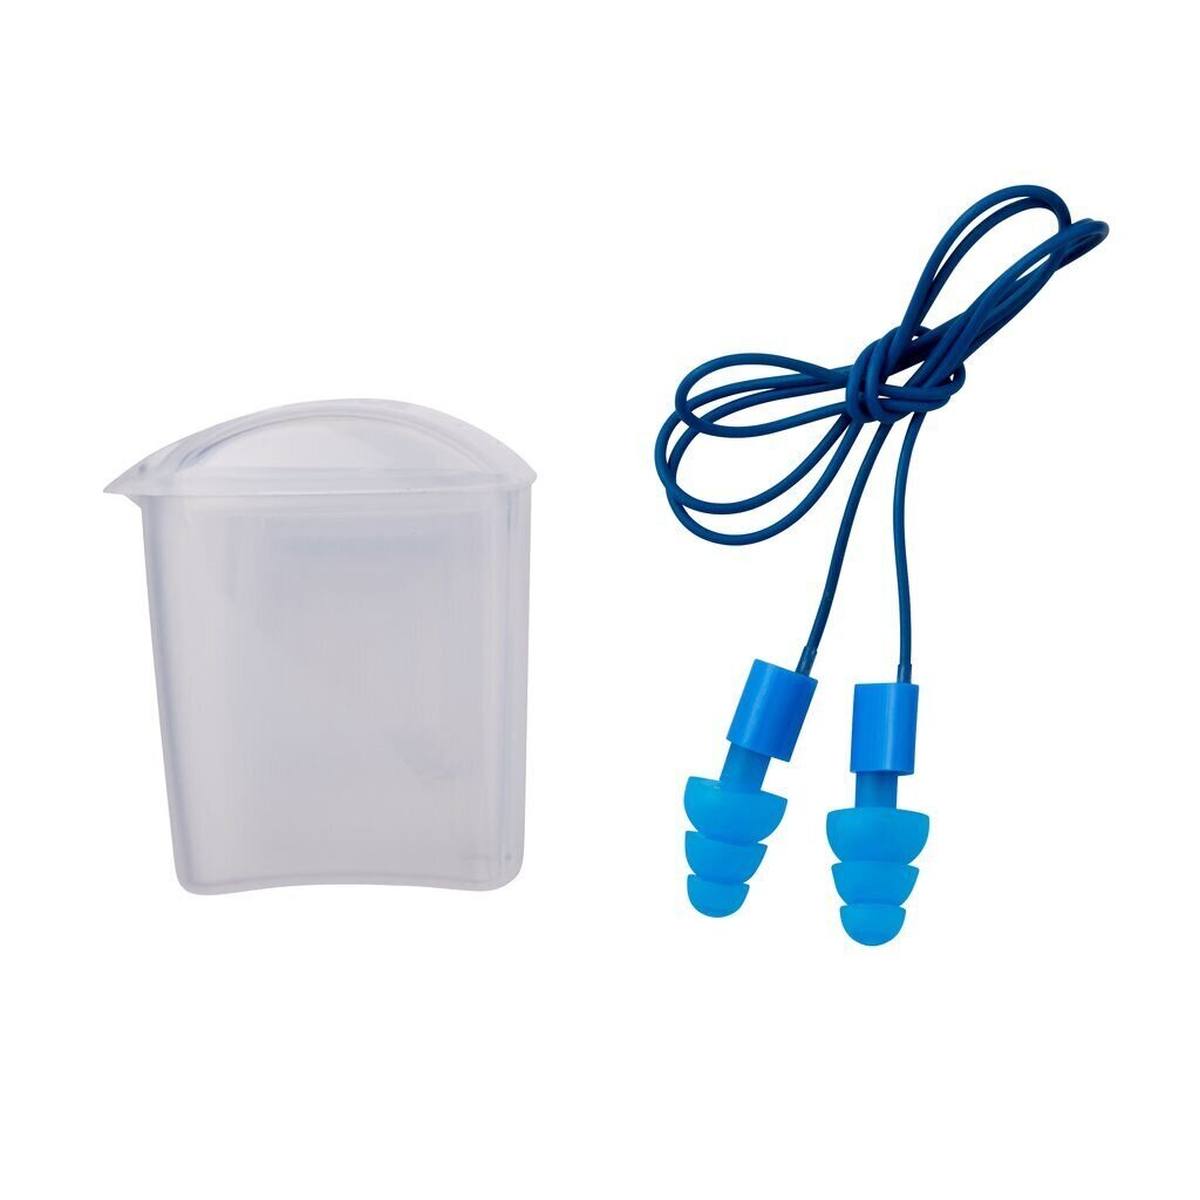 3M E-A-R Tracers 20 with detachable cord, metal detectable, with storage box, blue, SNR=20 dB, TR01001